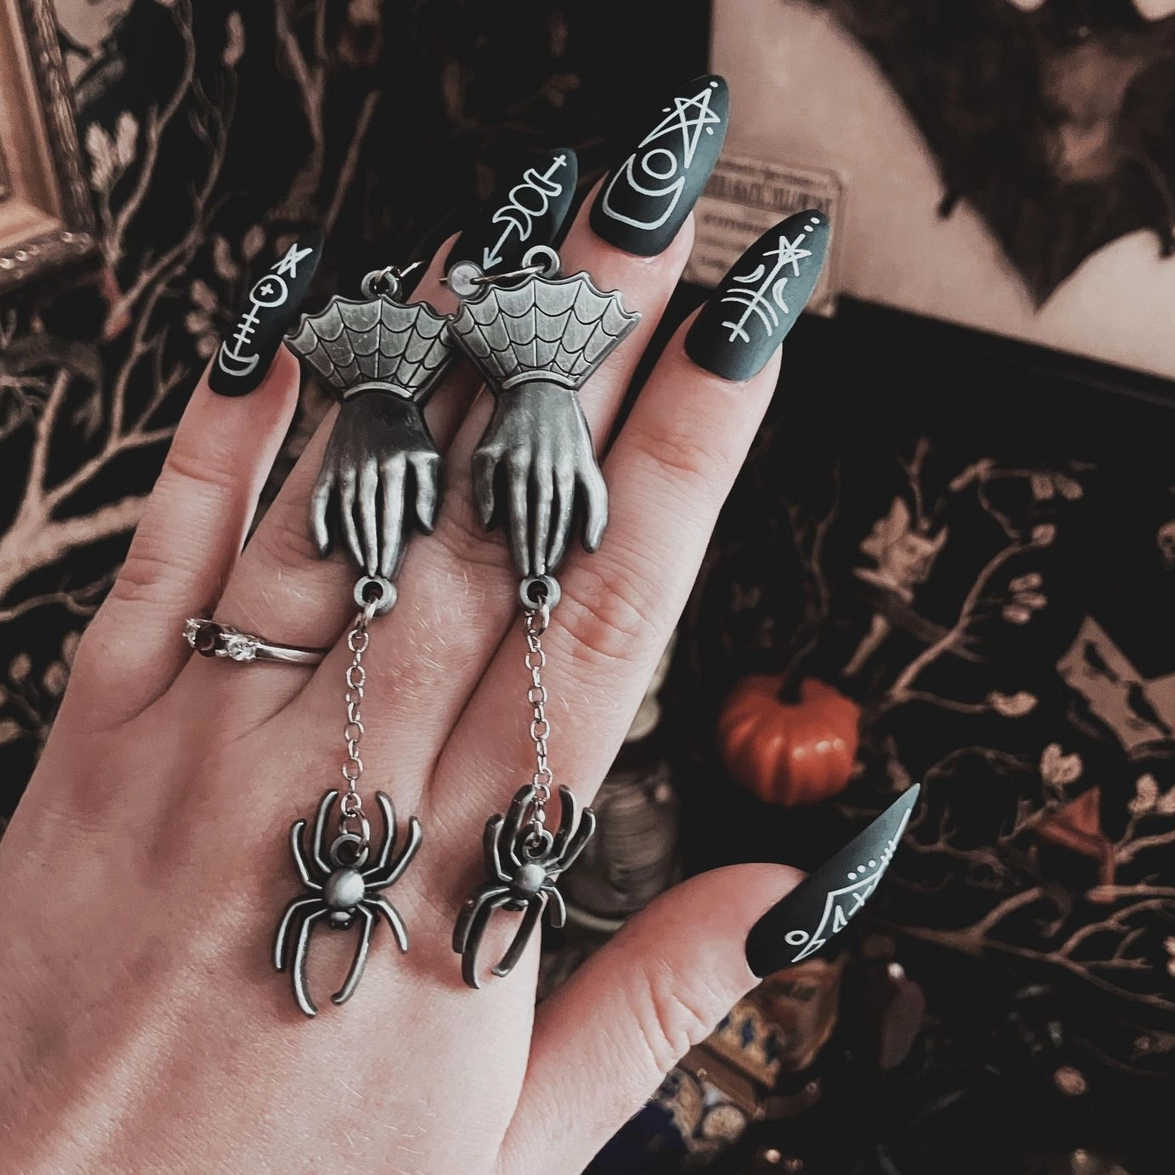 THE PICKETY WITCH HANDS OF ARACHNE EARRINGS